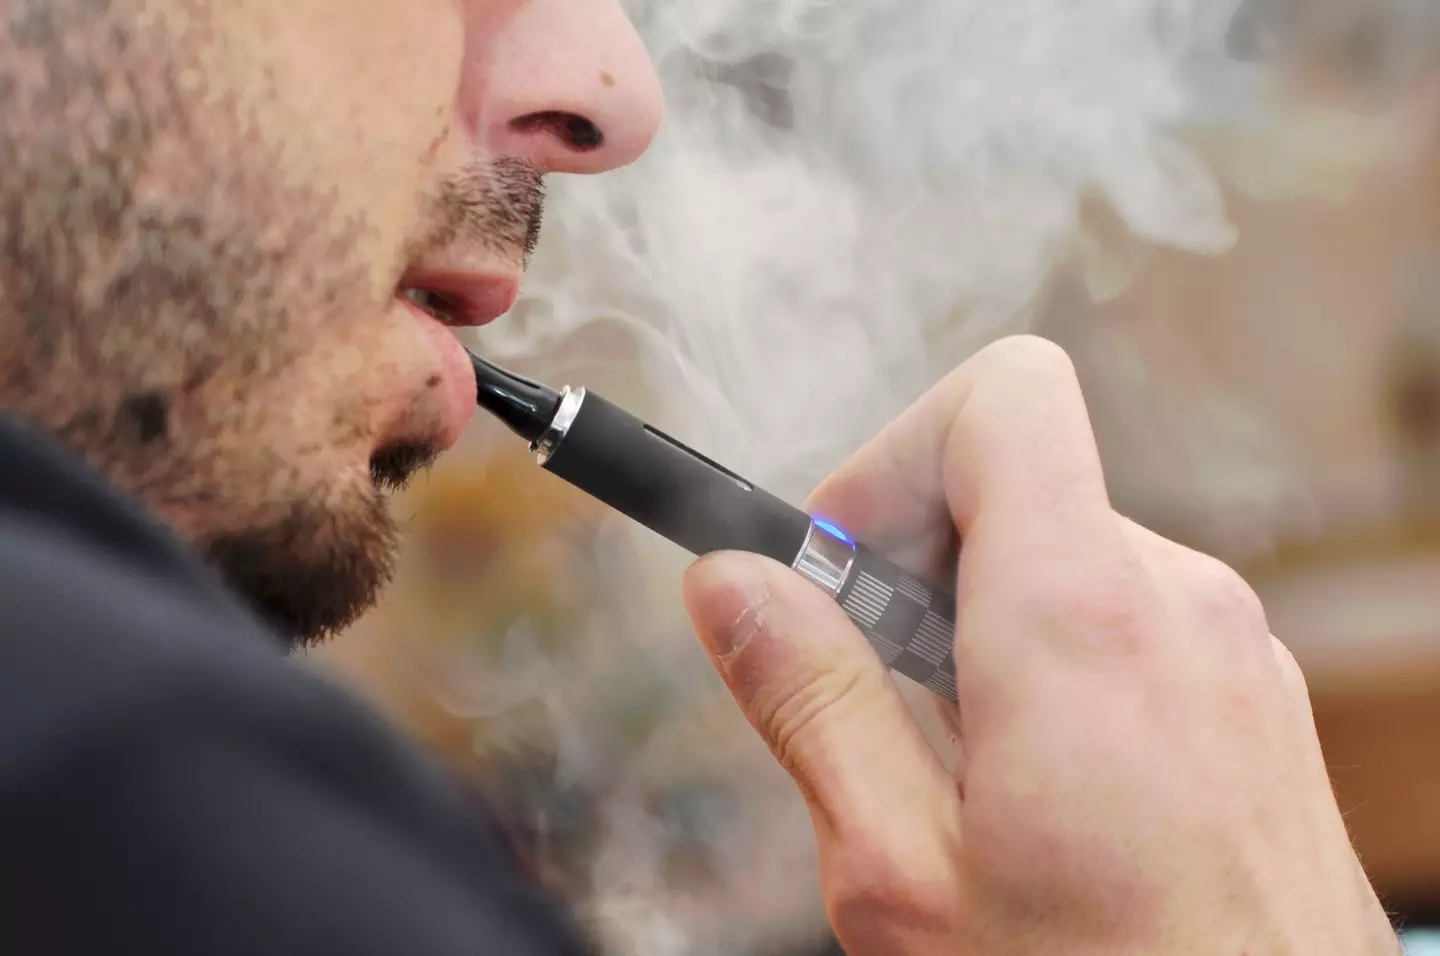 Giving up vaping certainly won't be easy, but the health benefits will certainly be worth it.